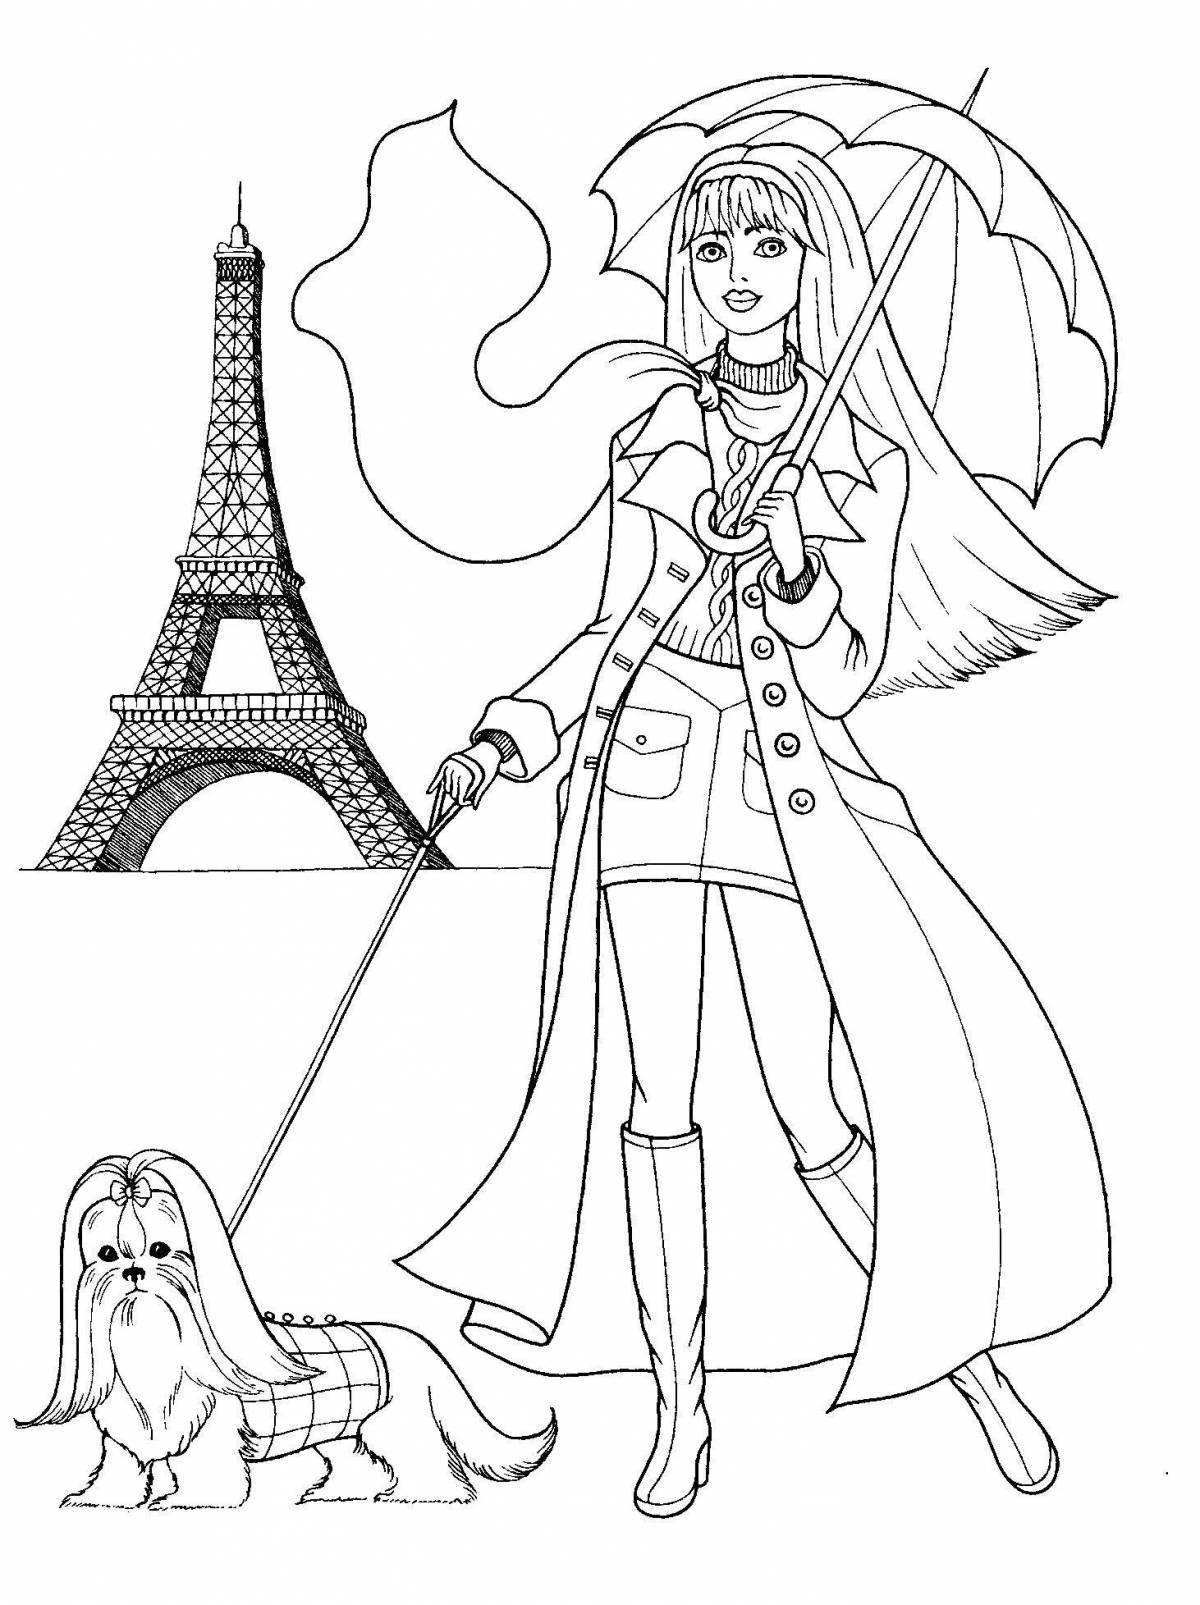 Quirky coloring page 13 for girls